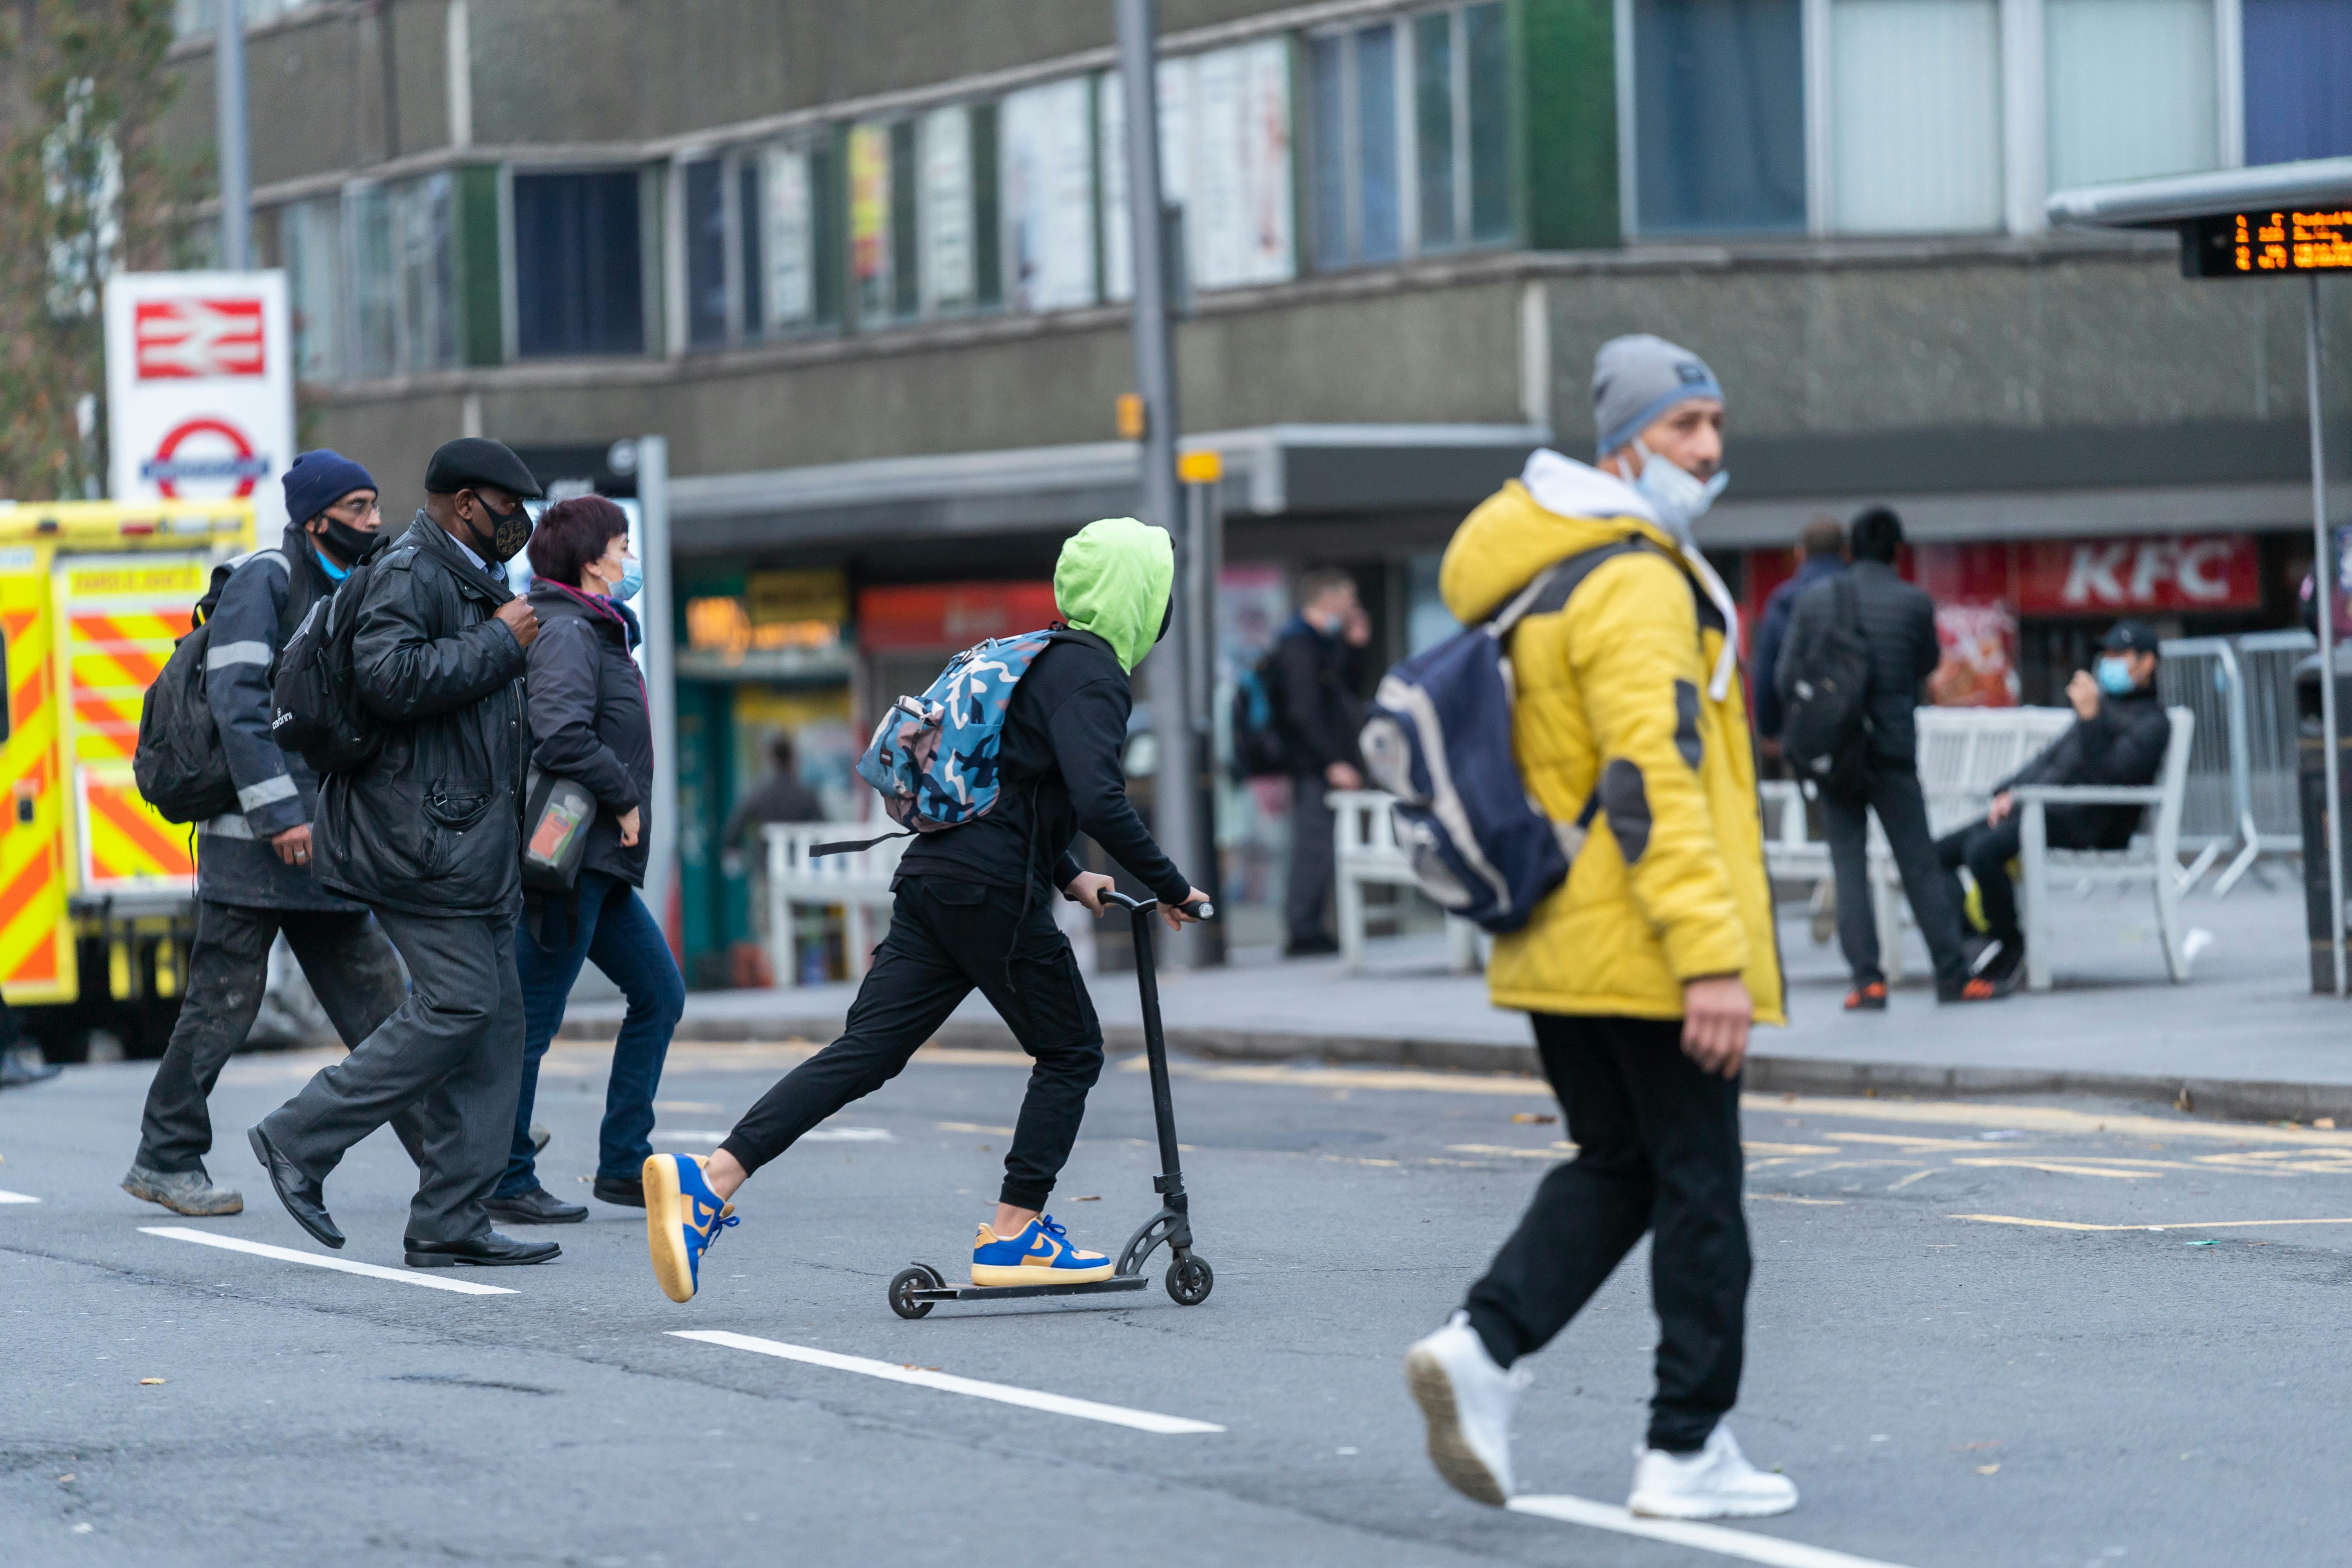 Pedestrians often take risks to cross the road